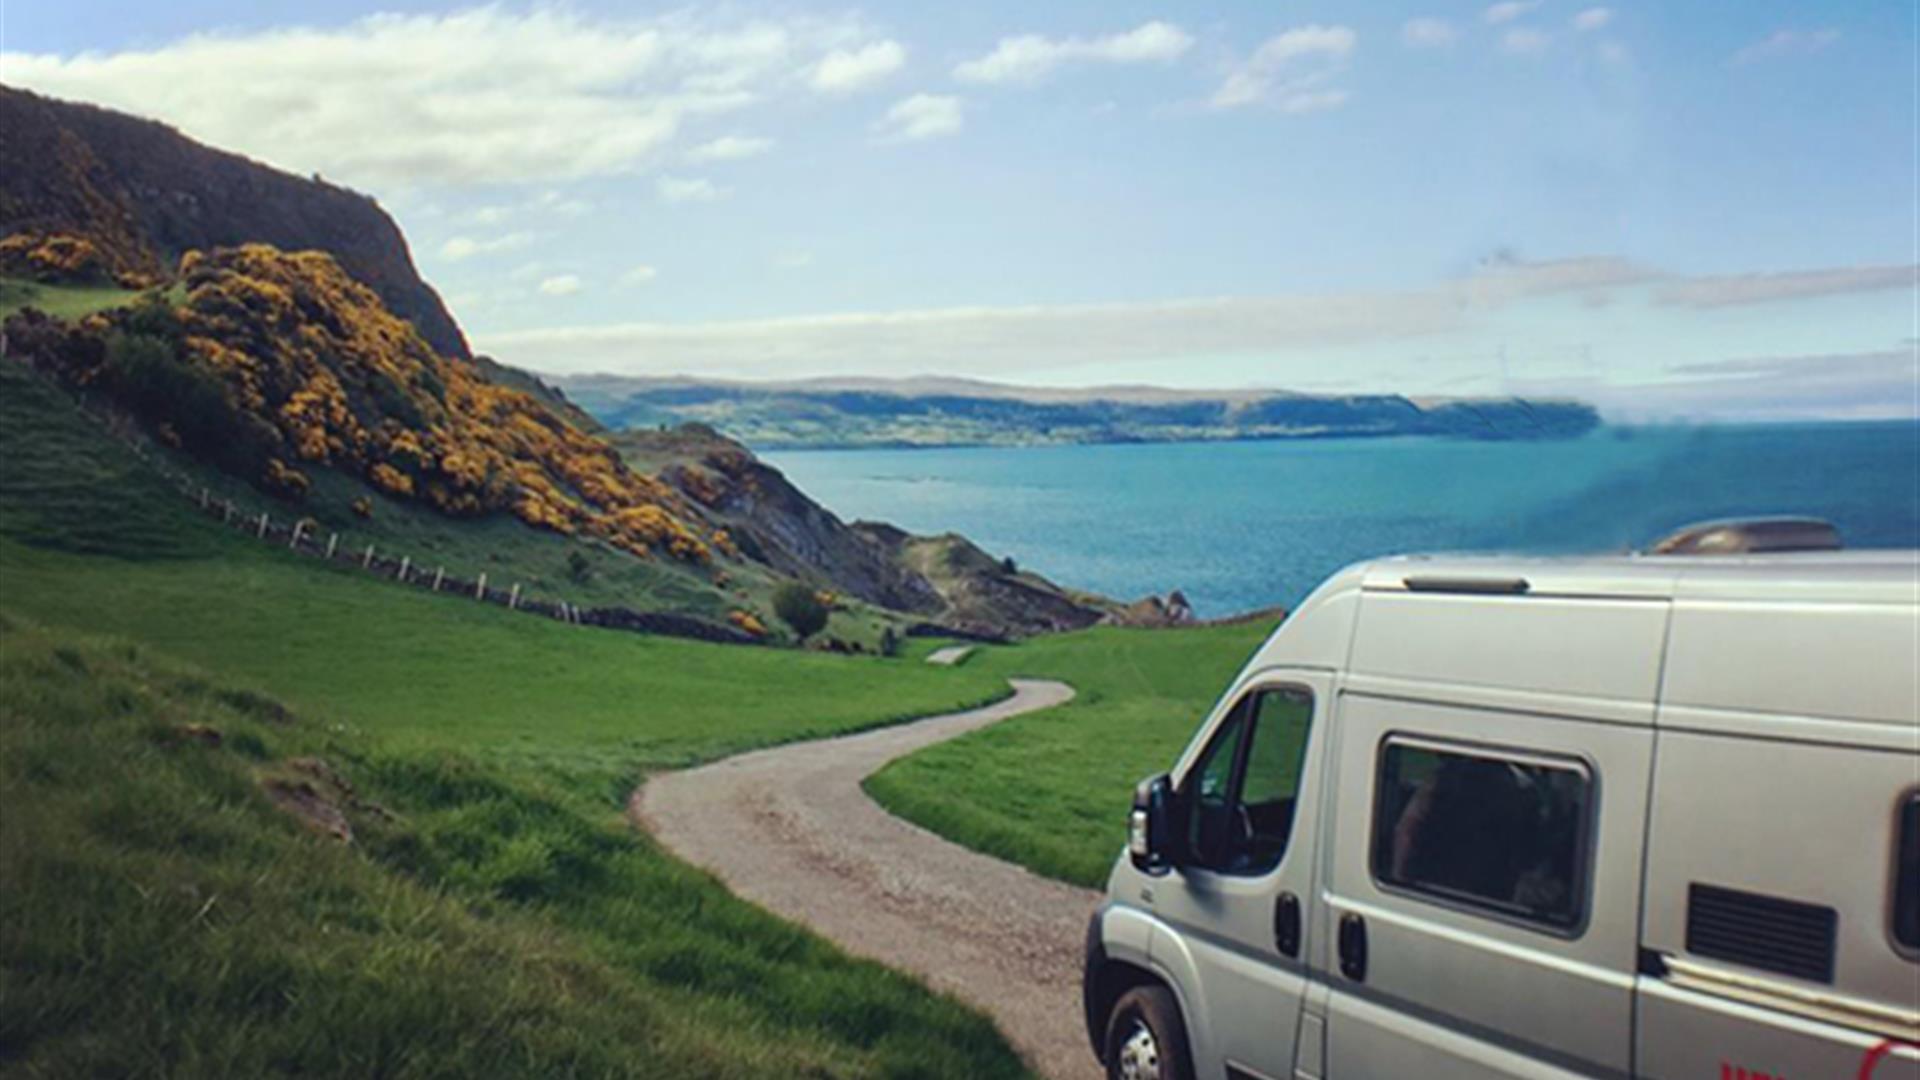 Image shows campervan on road leading down to the sea